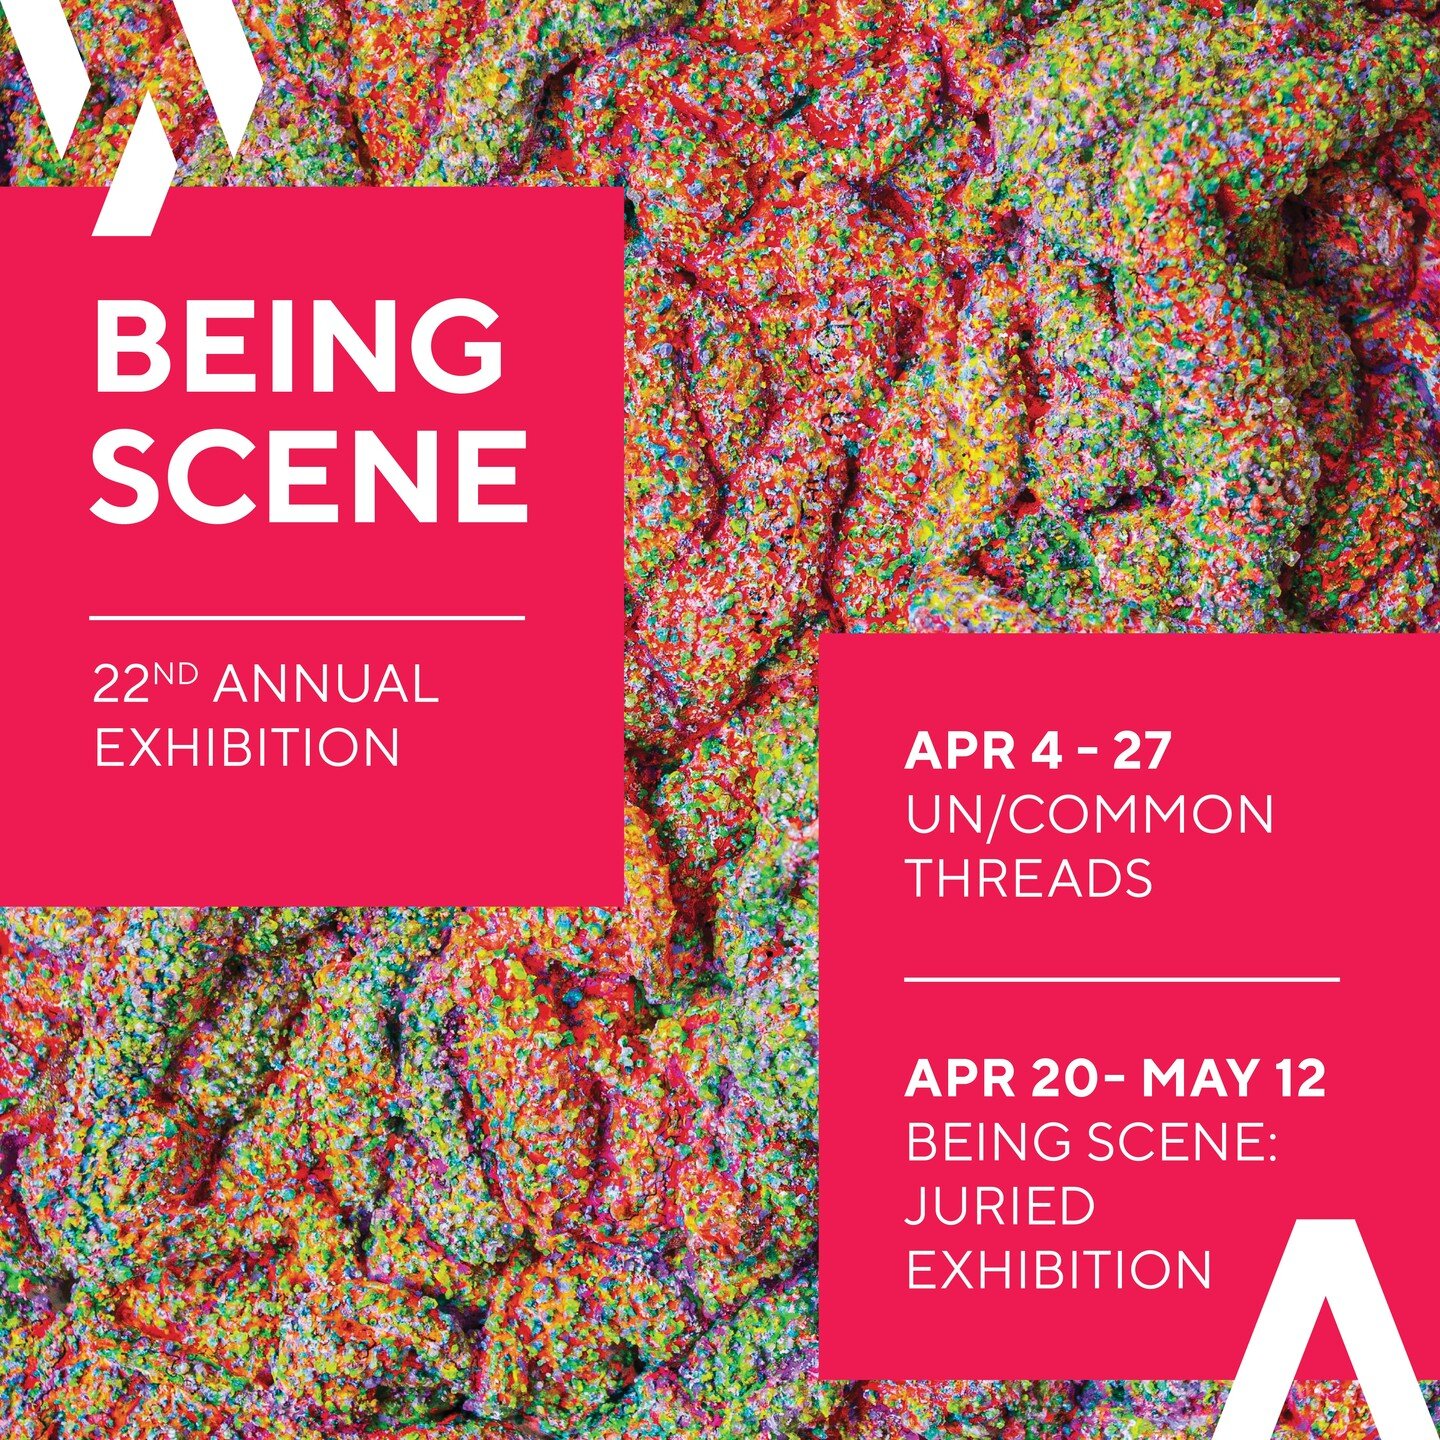 Our work is being featured in this upcoming exhibition, Un/Common Threads guest curated by Kat Singer @kre8tiveflow 

We hope you will be able to join us at 180 Shaw, suite 302 for the opening reception on April 6th from 6 - 9 PM and online artist ta